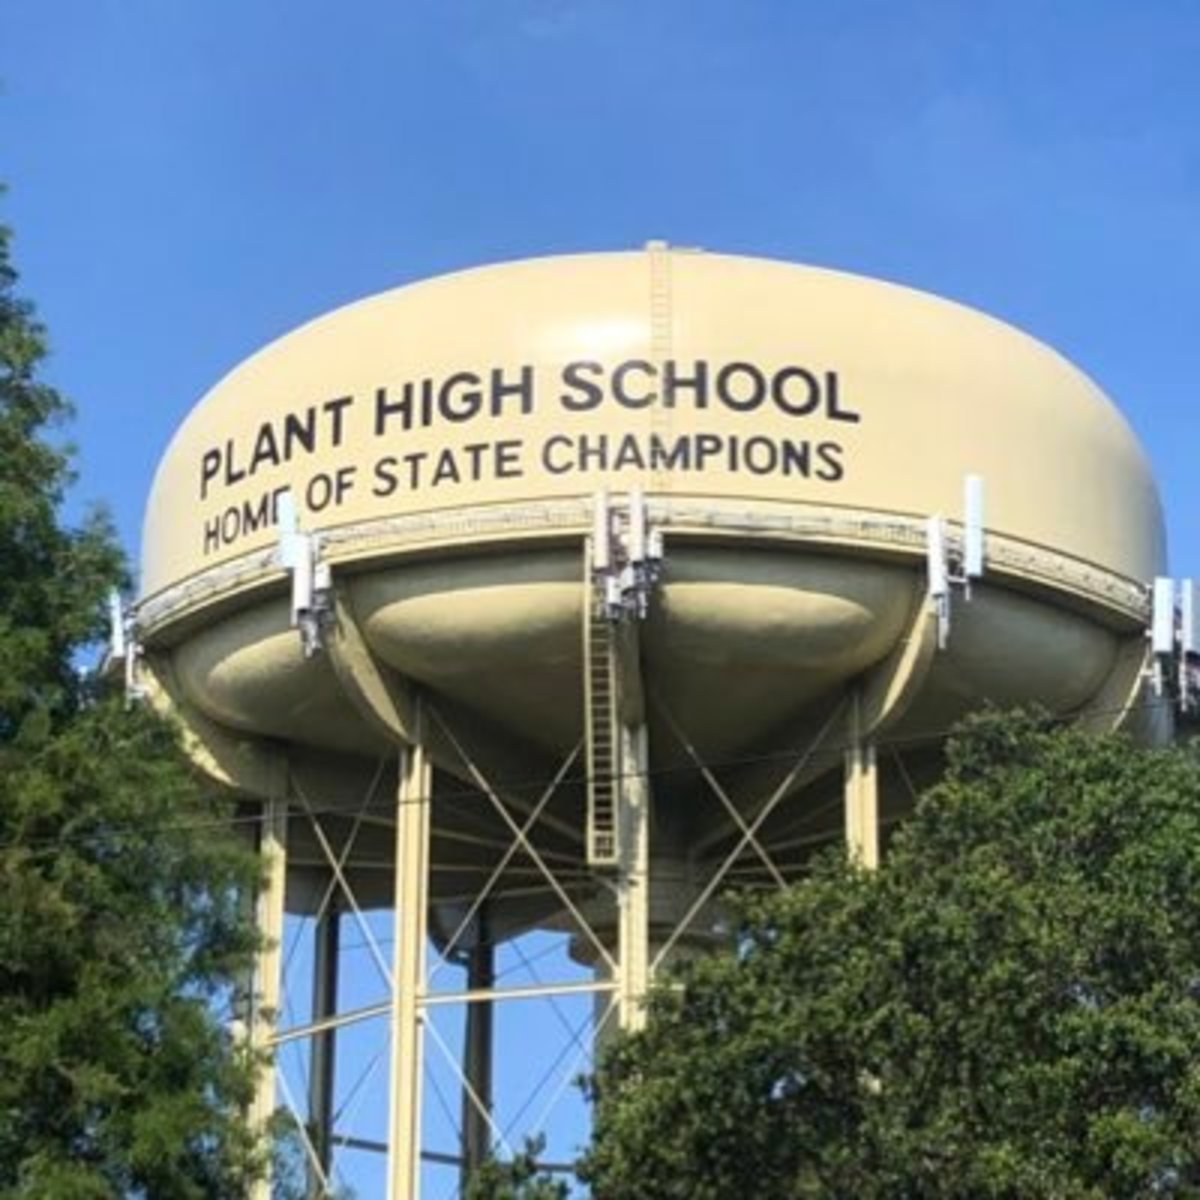 The water tower at Plant High School 